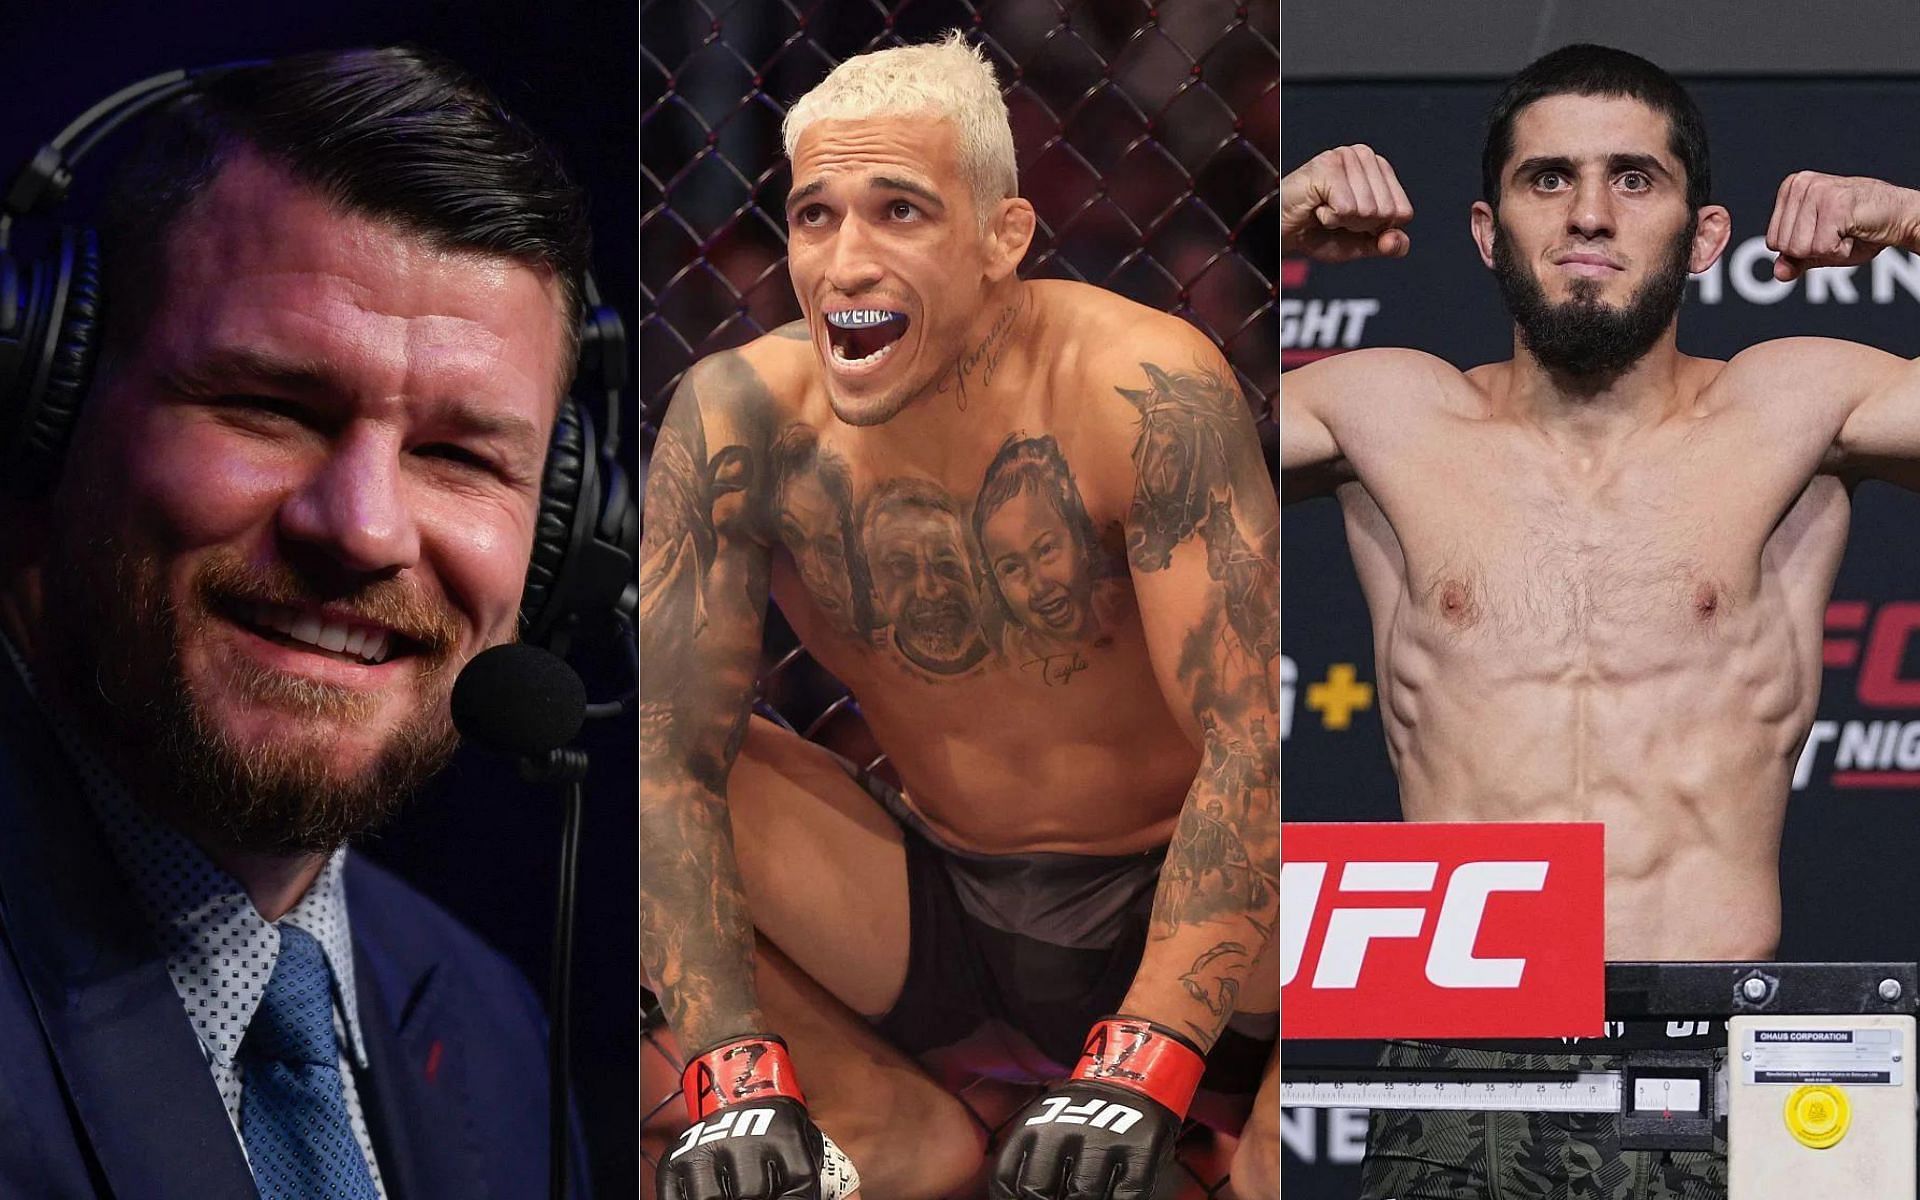 Michael Bisping (left), Charles Oliveira (center), and Islam Makhachev (right)